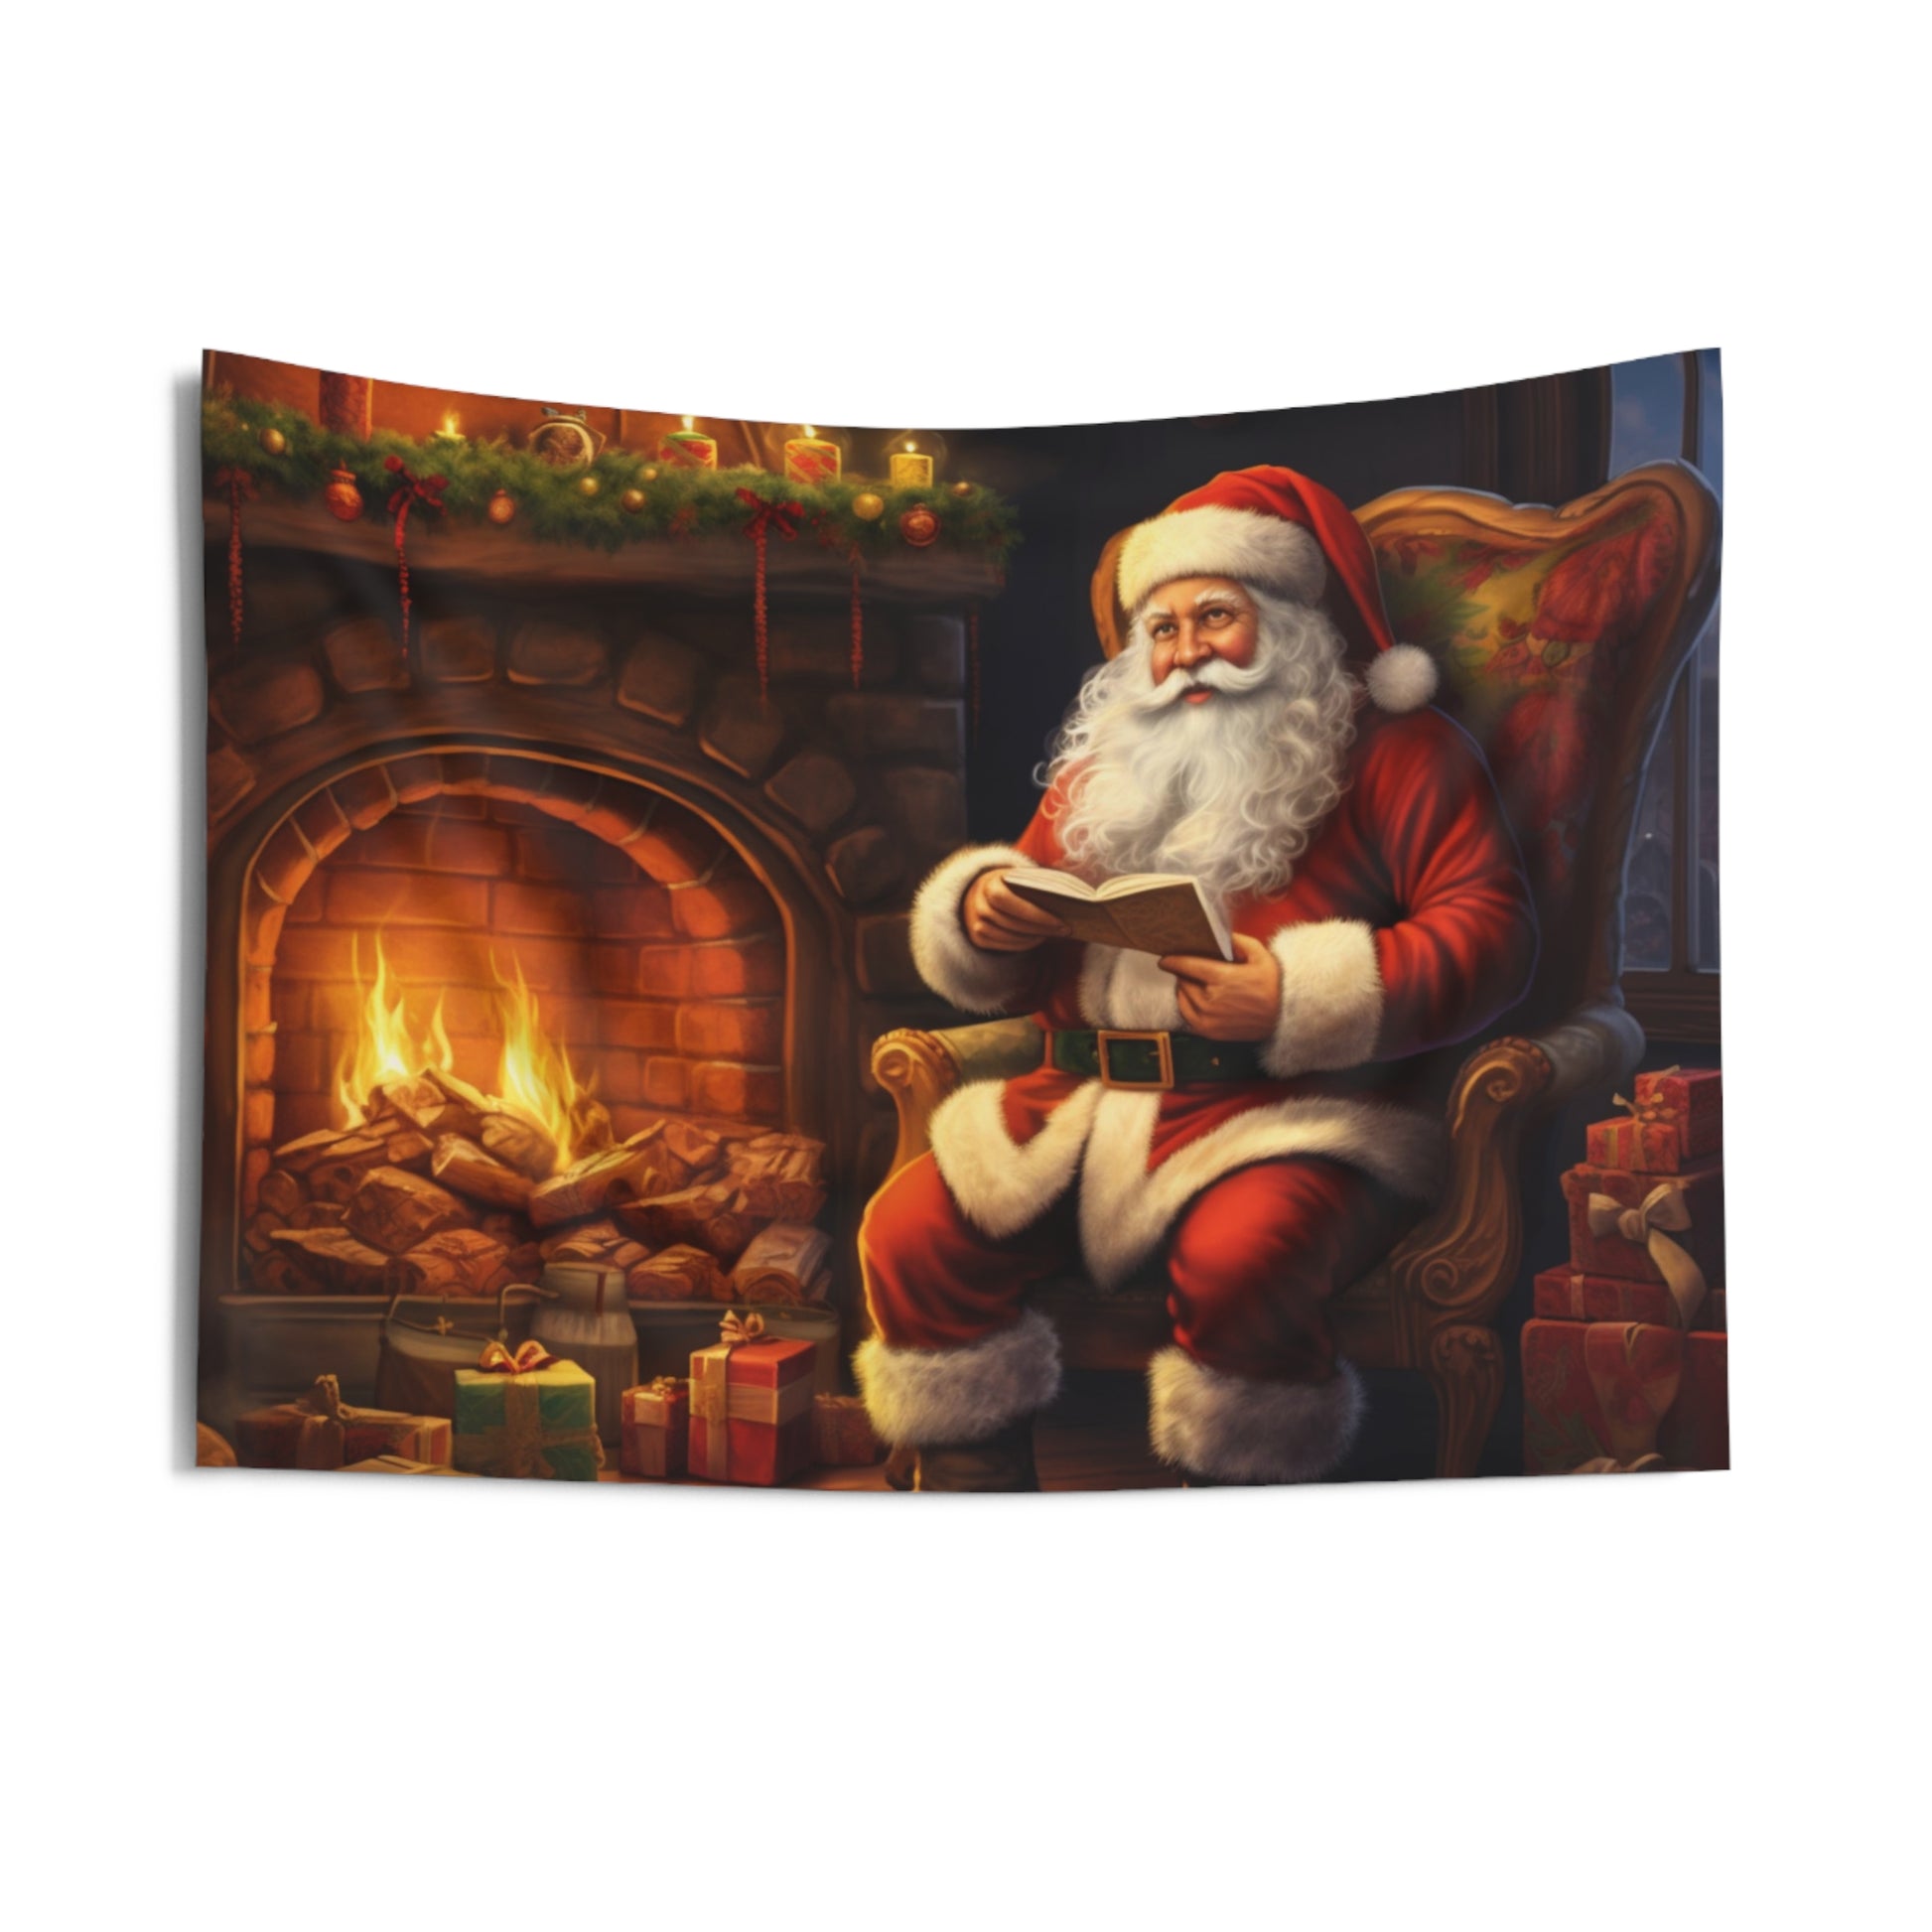 Santa Claus Christmas Tapestry, Fireplace Presents Wall Art Hanging Cool Unique Landscape Aesthetic Large Small Decor Bedroom Dorm Room Starcove Fashion